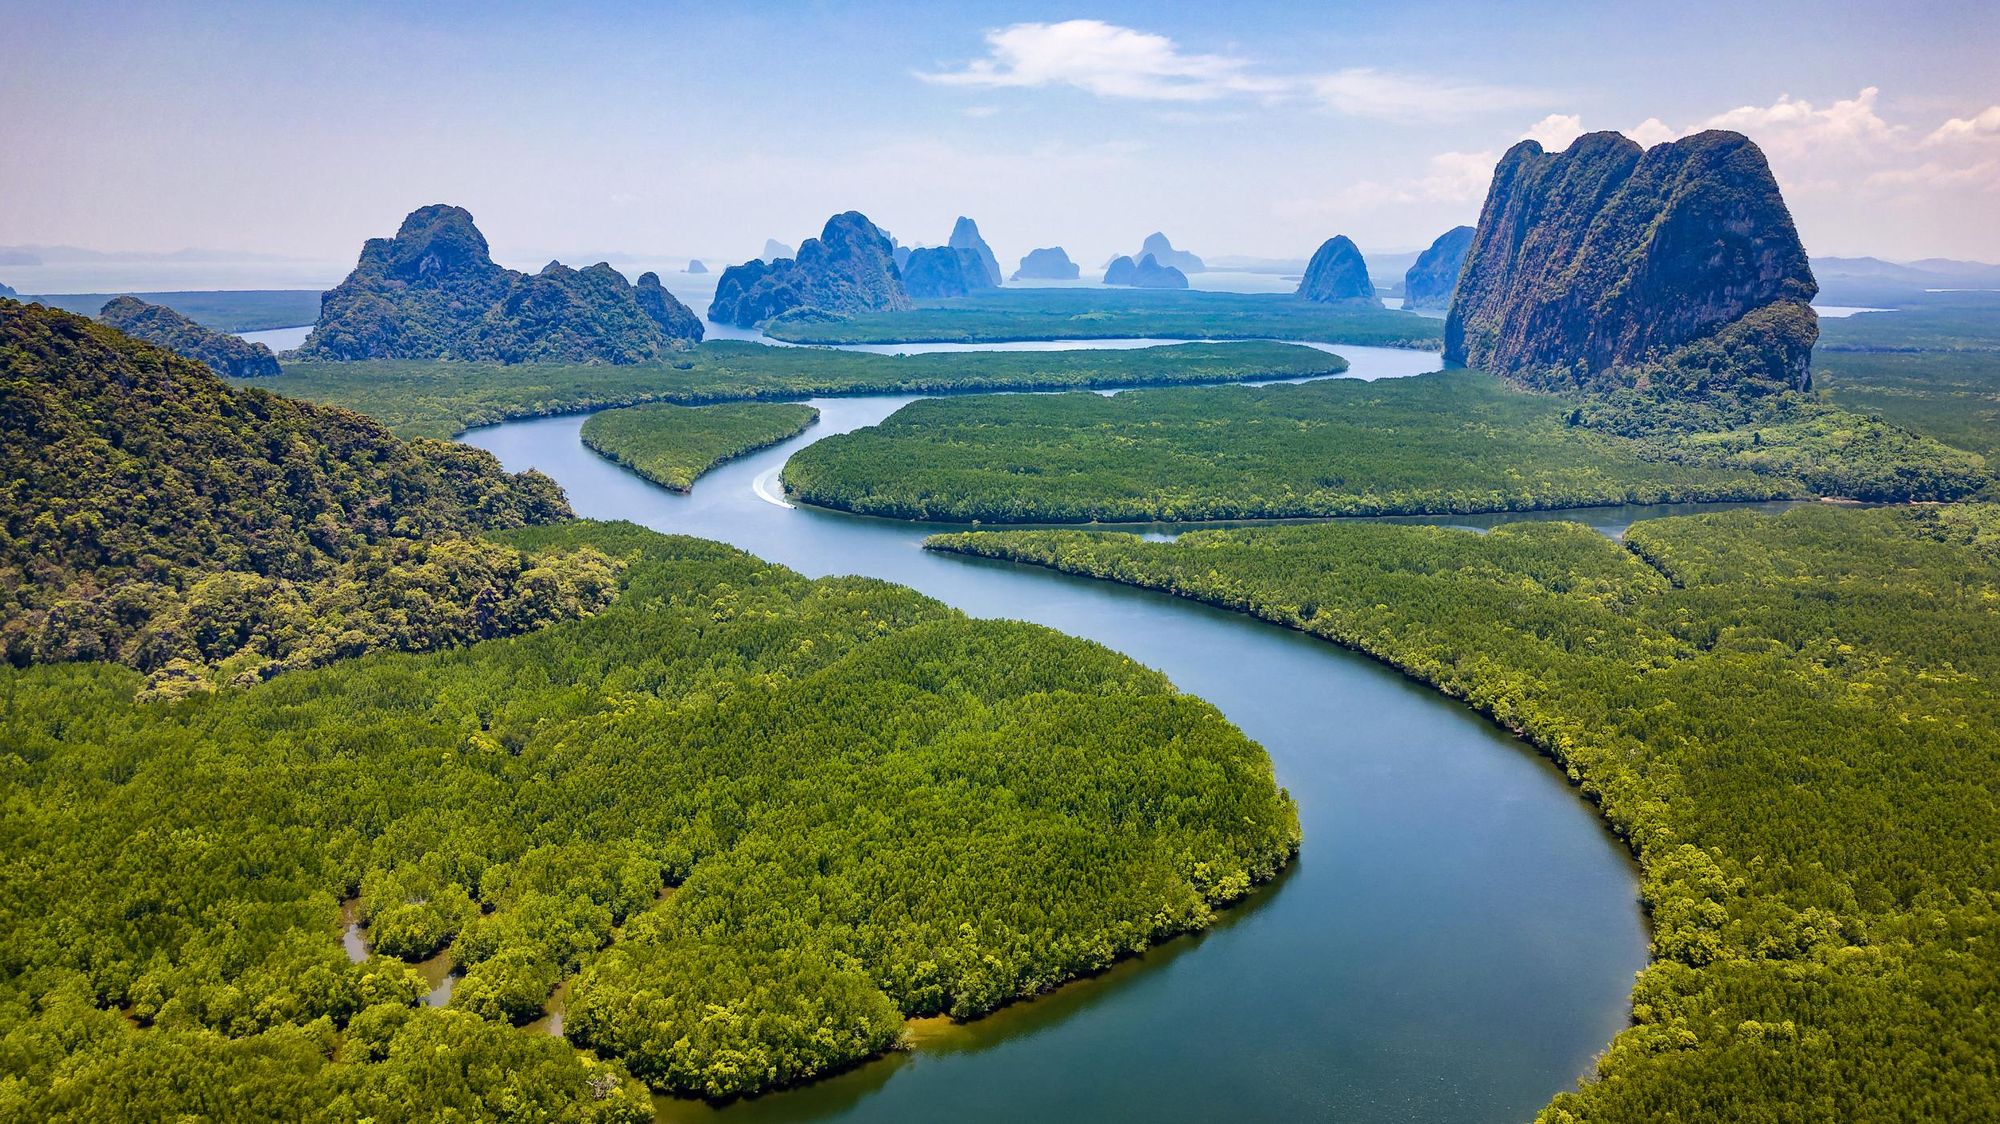 A huge mangrove forest and the towering limestone pinnacles of Phang Nga Bay, Thailand. Photo: Getty